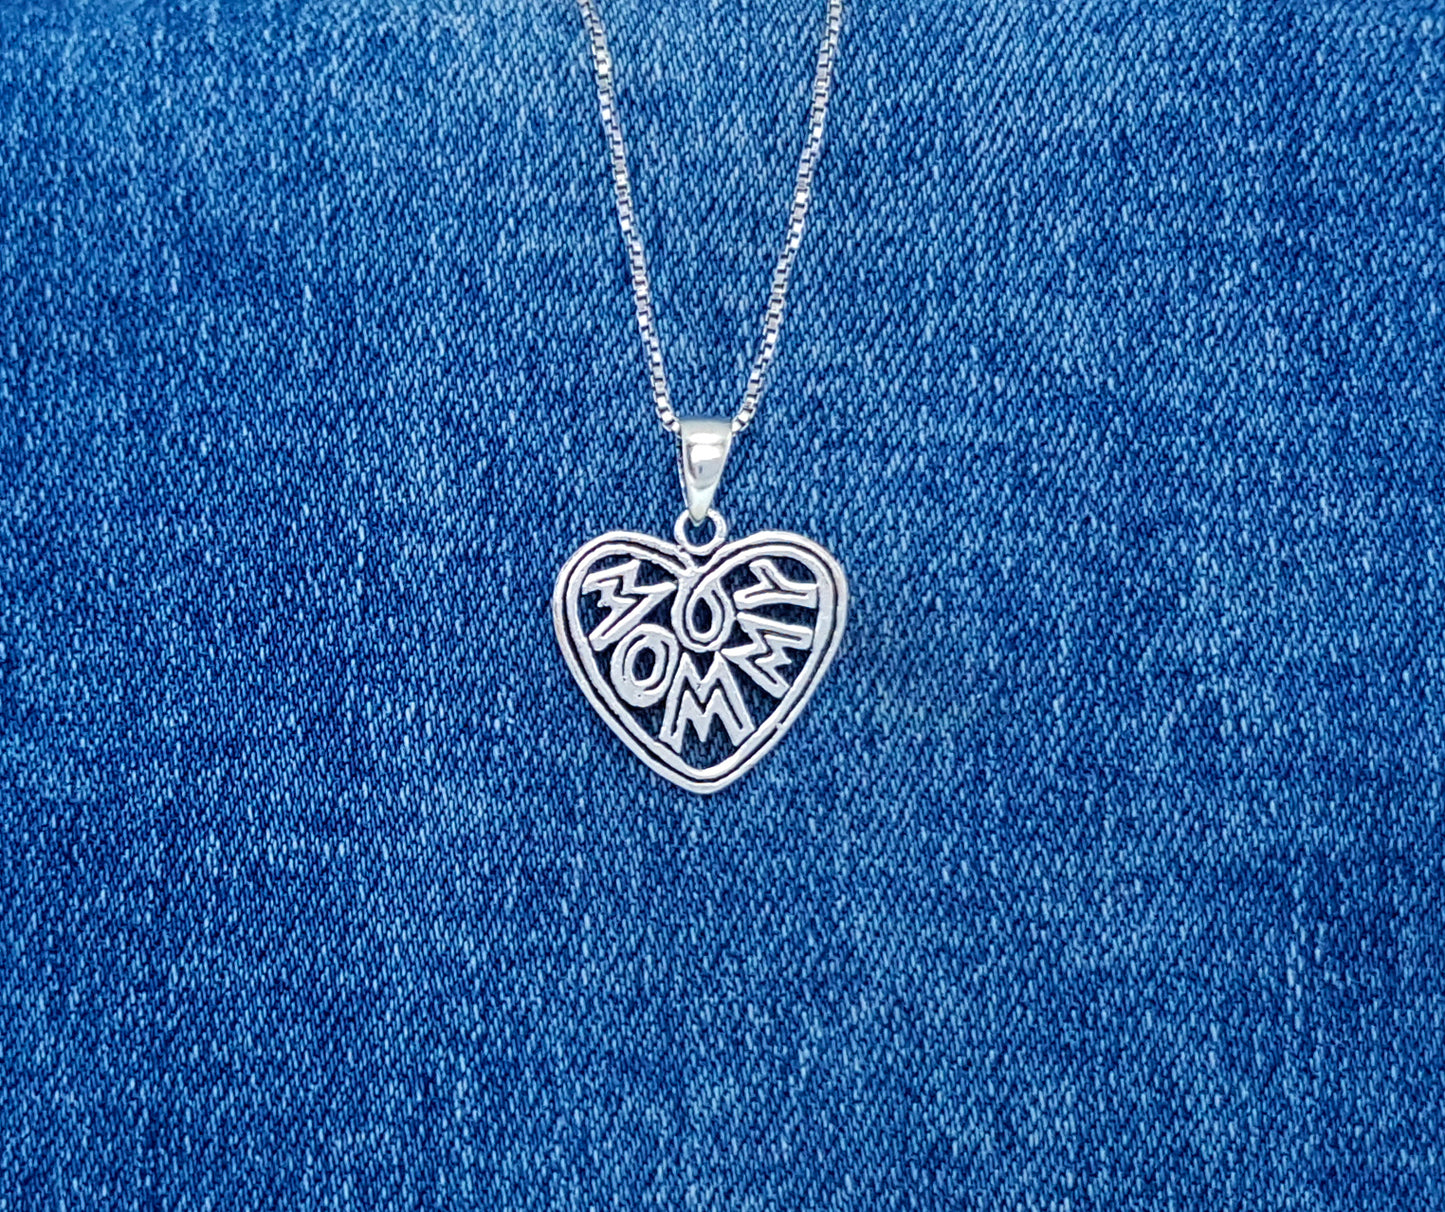 Sterling Silver Heart Pendant / Charm